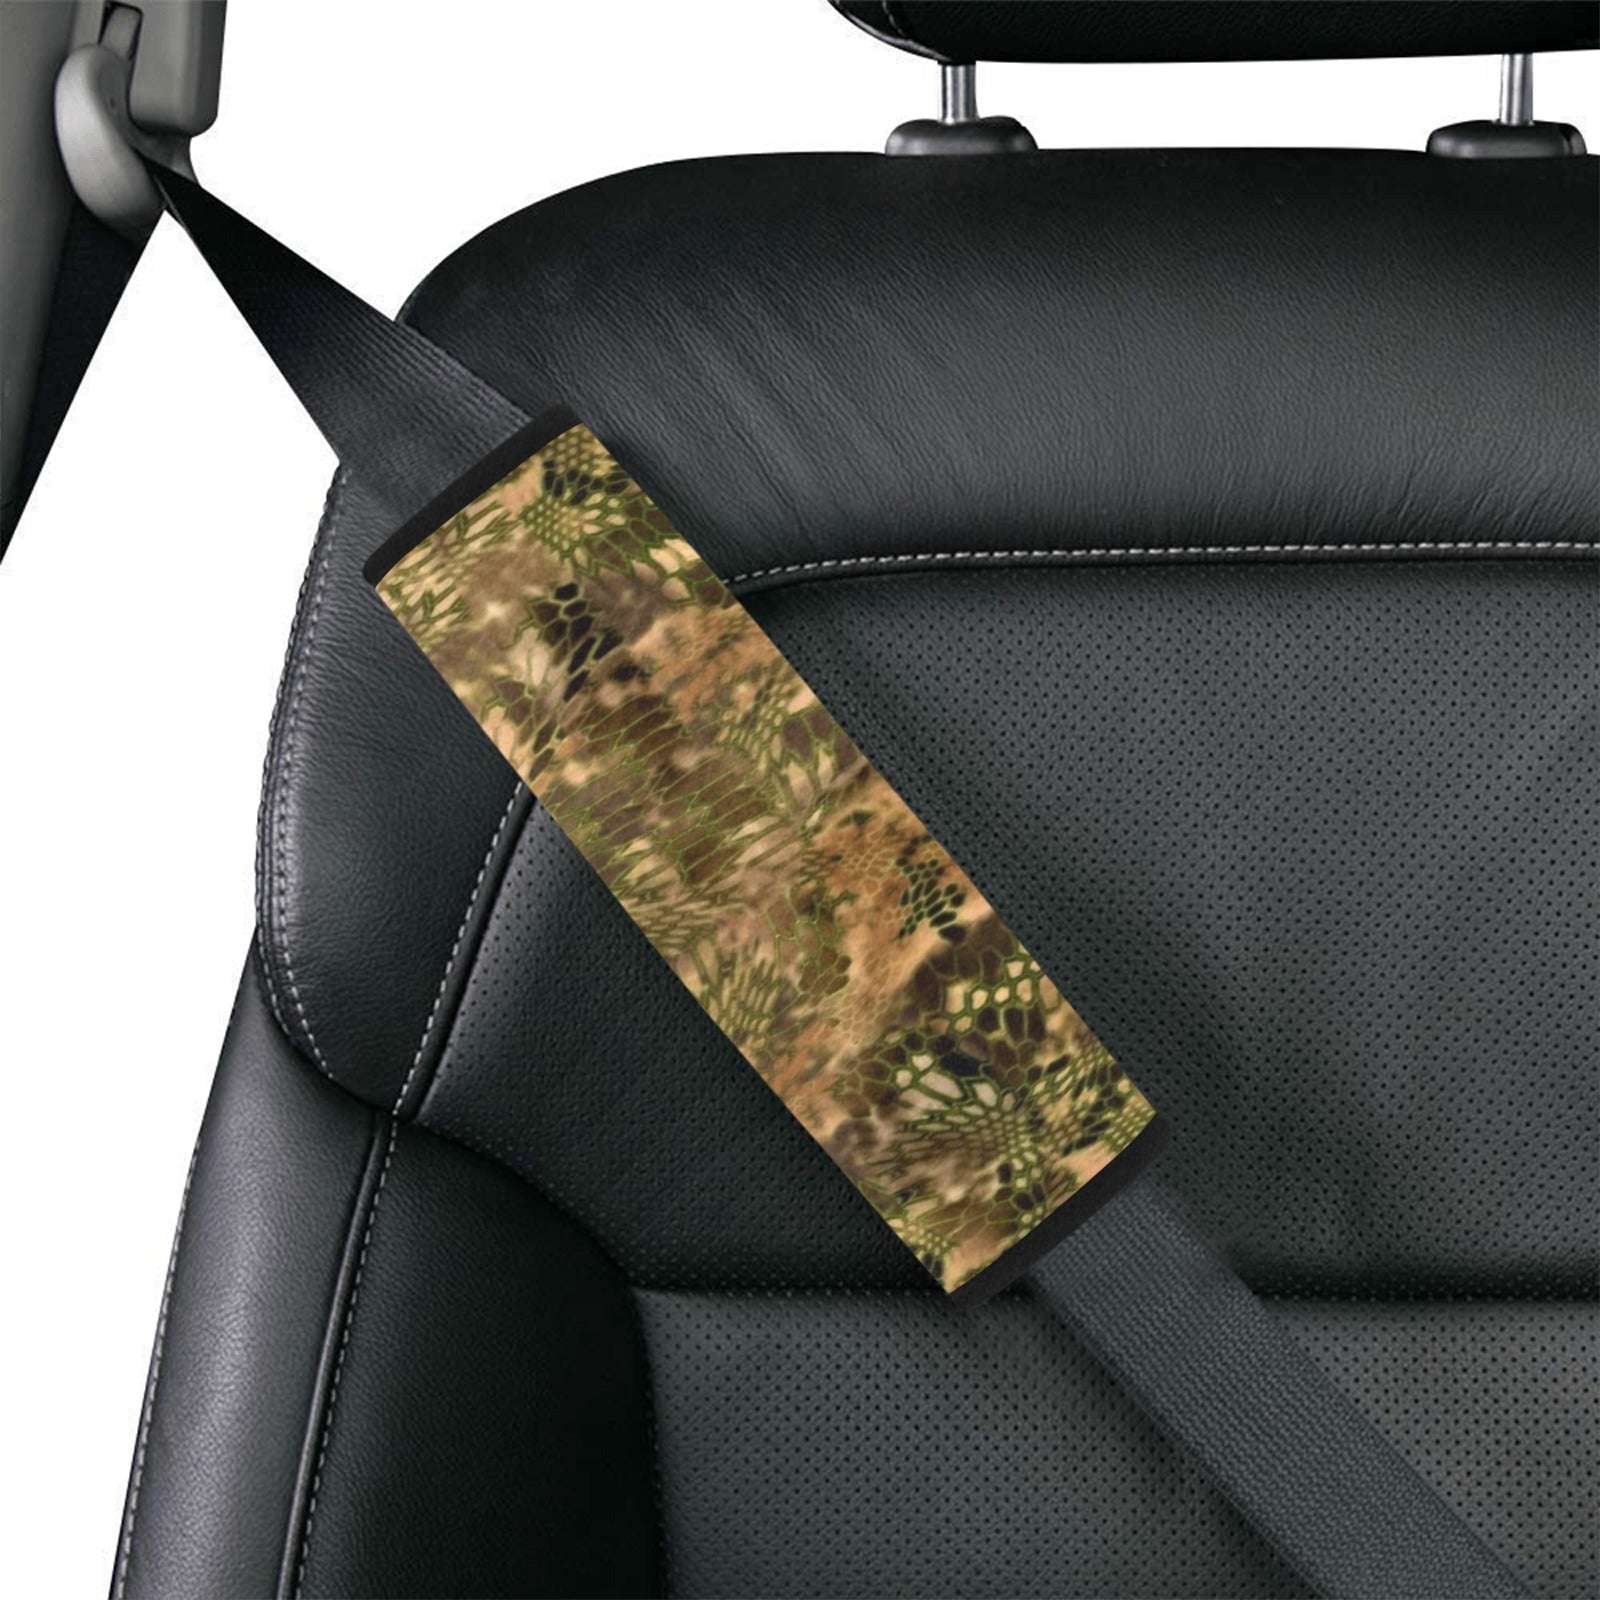 Dry Country Camo Seat Belt Cover 7" x 12.6"